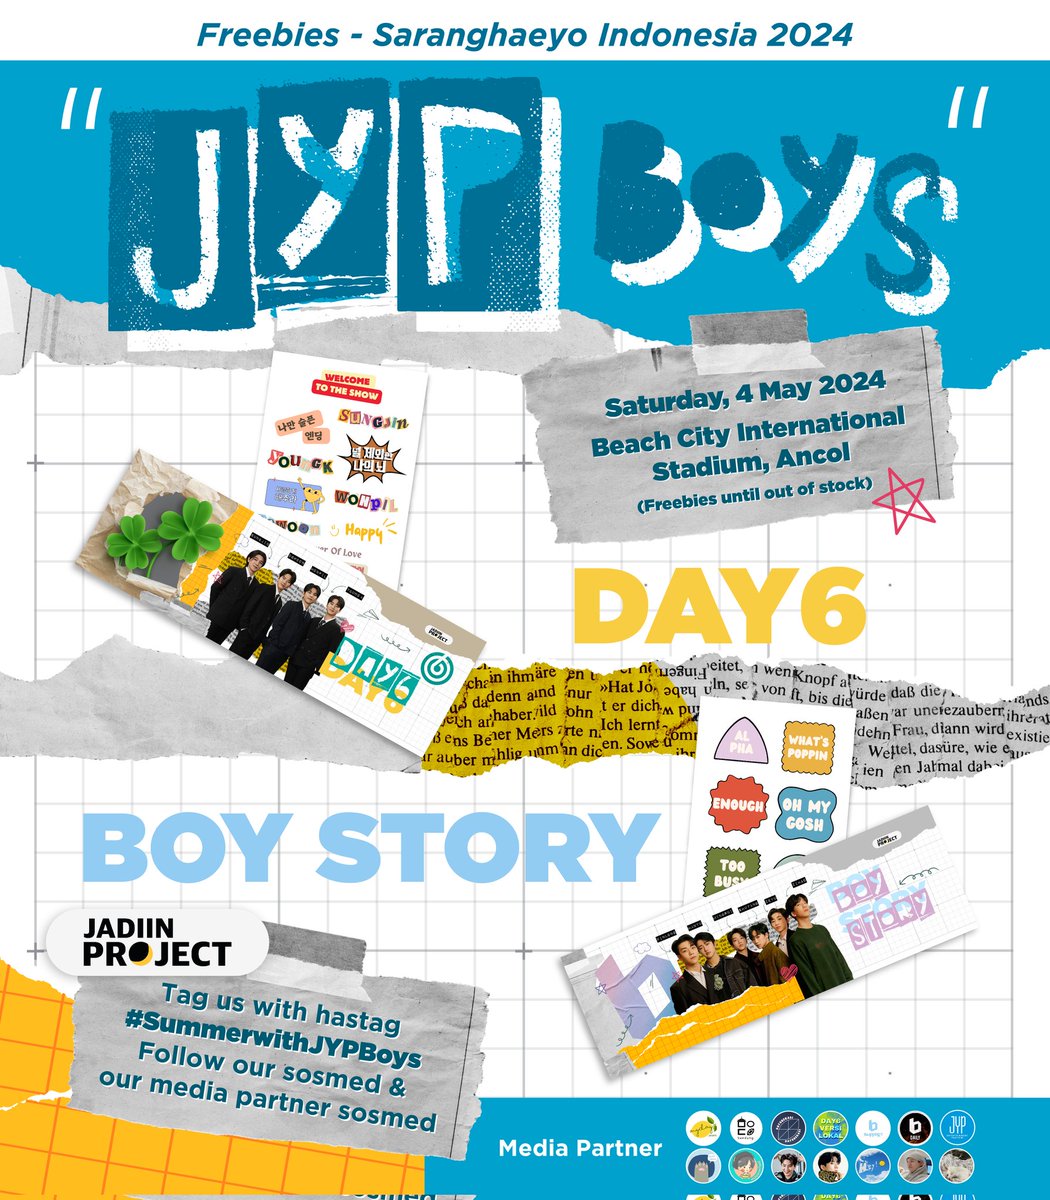 ✨️ Freebies Support ✨️
SHI 2024 JYP Boys 🌊
💙 Day6 x Boystory 💙

📆 May 4, 2024
📍BCIS 

🔹RT and like this tweet
🔹Say hi to our Crew at the venue
🔹Tag us on X or IG if you get this freebies
🔹Limited Quantity 

#SHI2024
#SummerwithJYPBoys
@day6official @BOYSTORY_WORLD